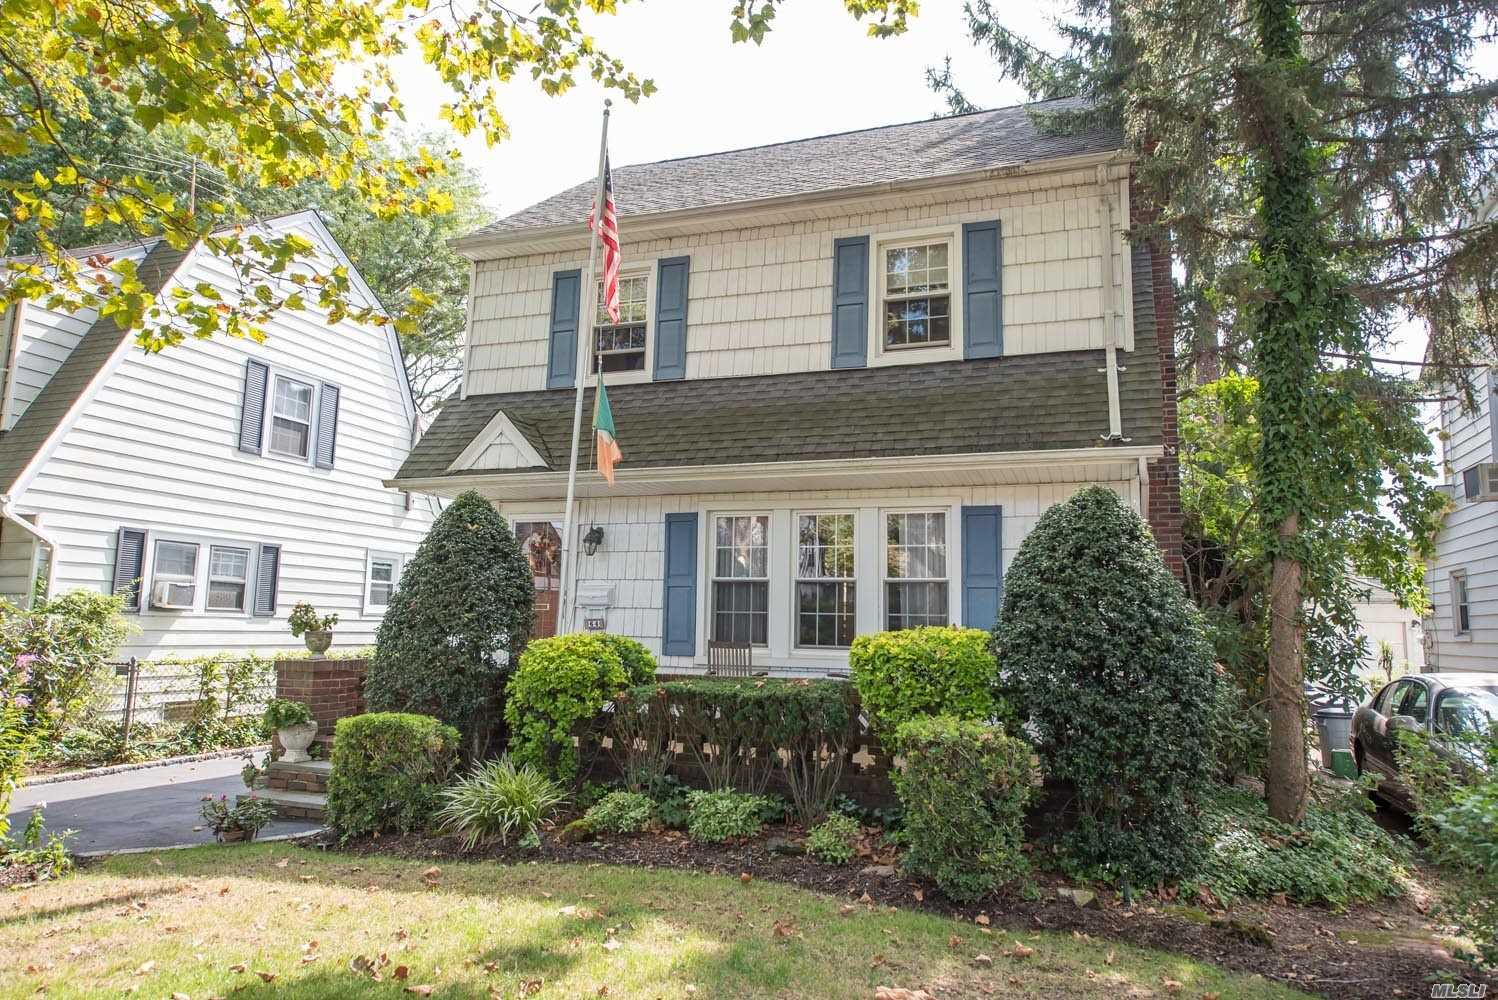 Charming Dutch Colonial Located In The Village Offering Living Room w/Fireplace, Formal Dining Room, Eat-In-Kitchen, 3 Bedrooms & 1.5 Baths. Hardwood Floors Throughout, Walk Up Attic, Full Basement & 1 Car Detached Garage